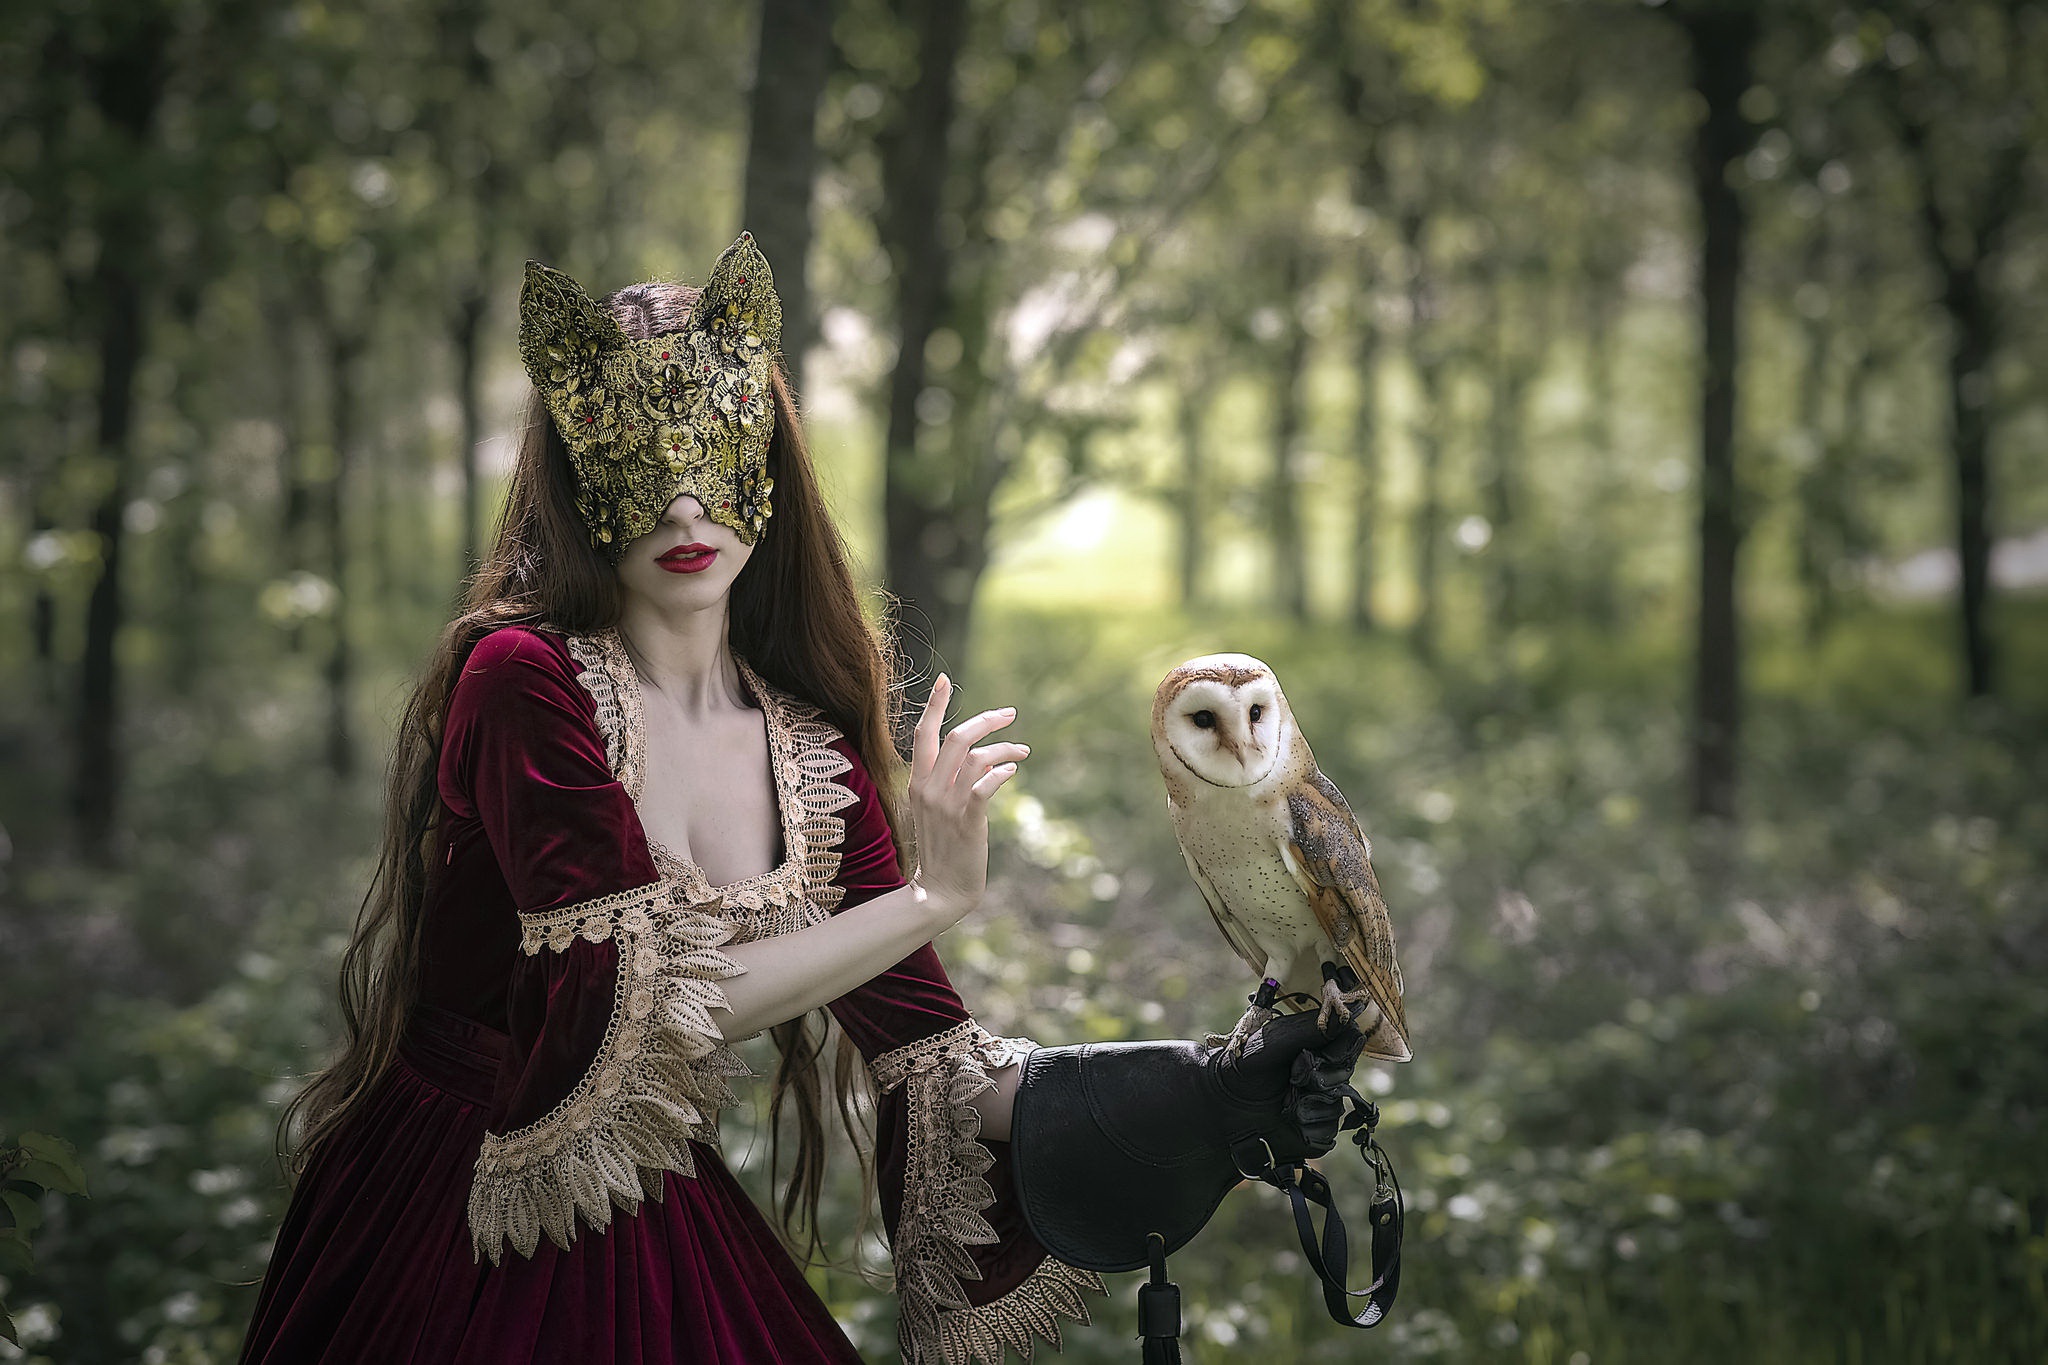 People 2048x1365 women model red dress mascara long hair neckline owl forest nature birds red lipstick costumes classical cleavage